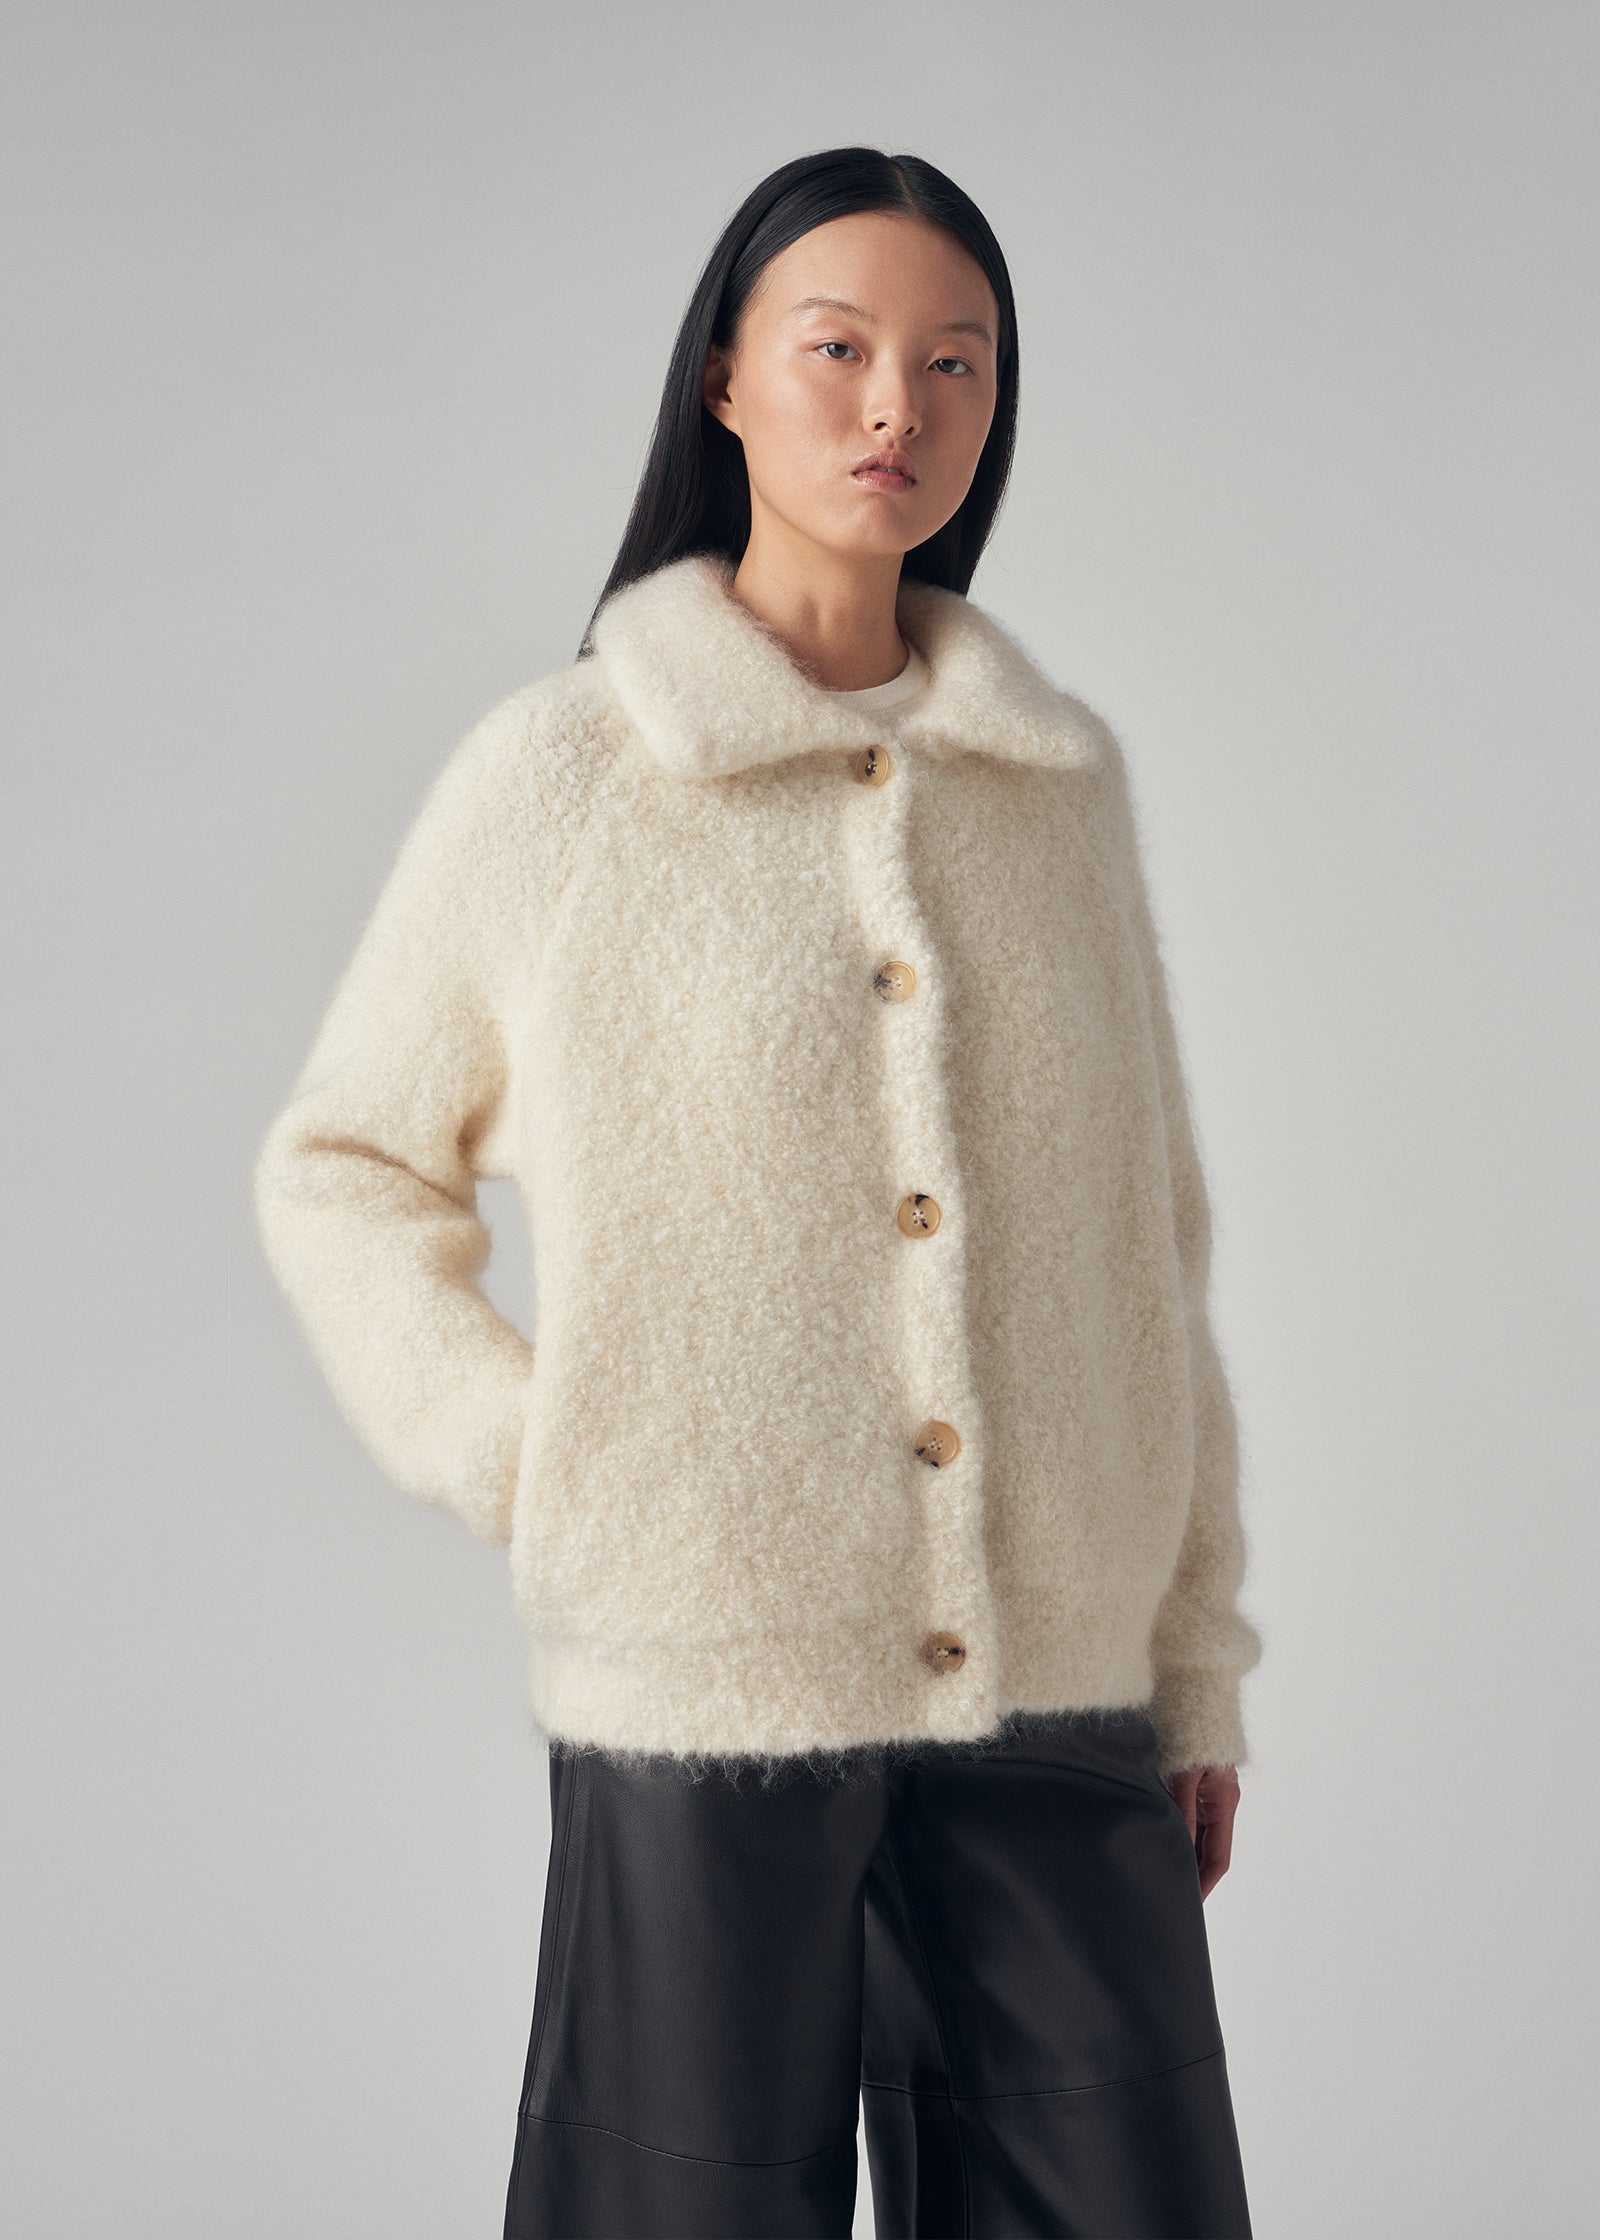 Bouclé Cardigan in Mohair Wool - Ivory - CO Collections